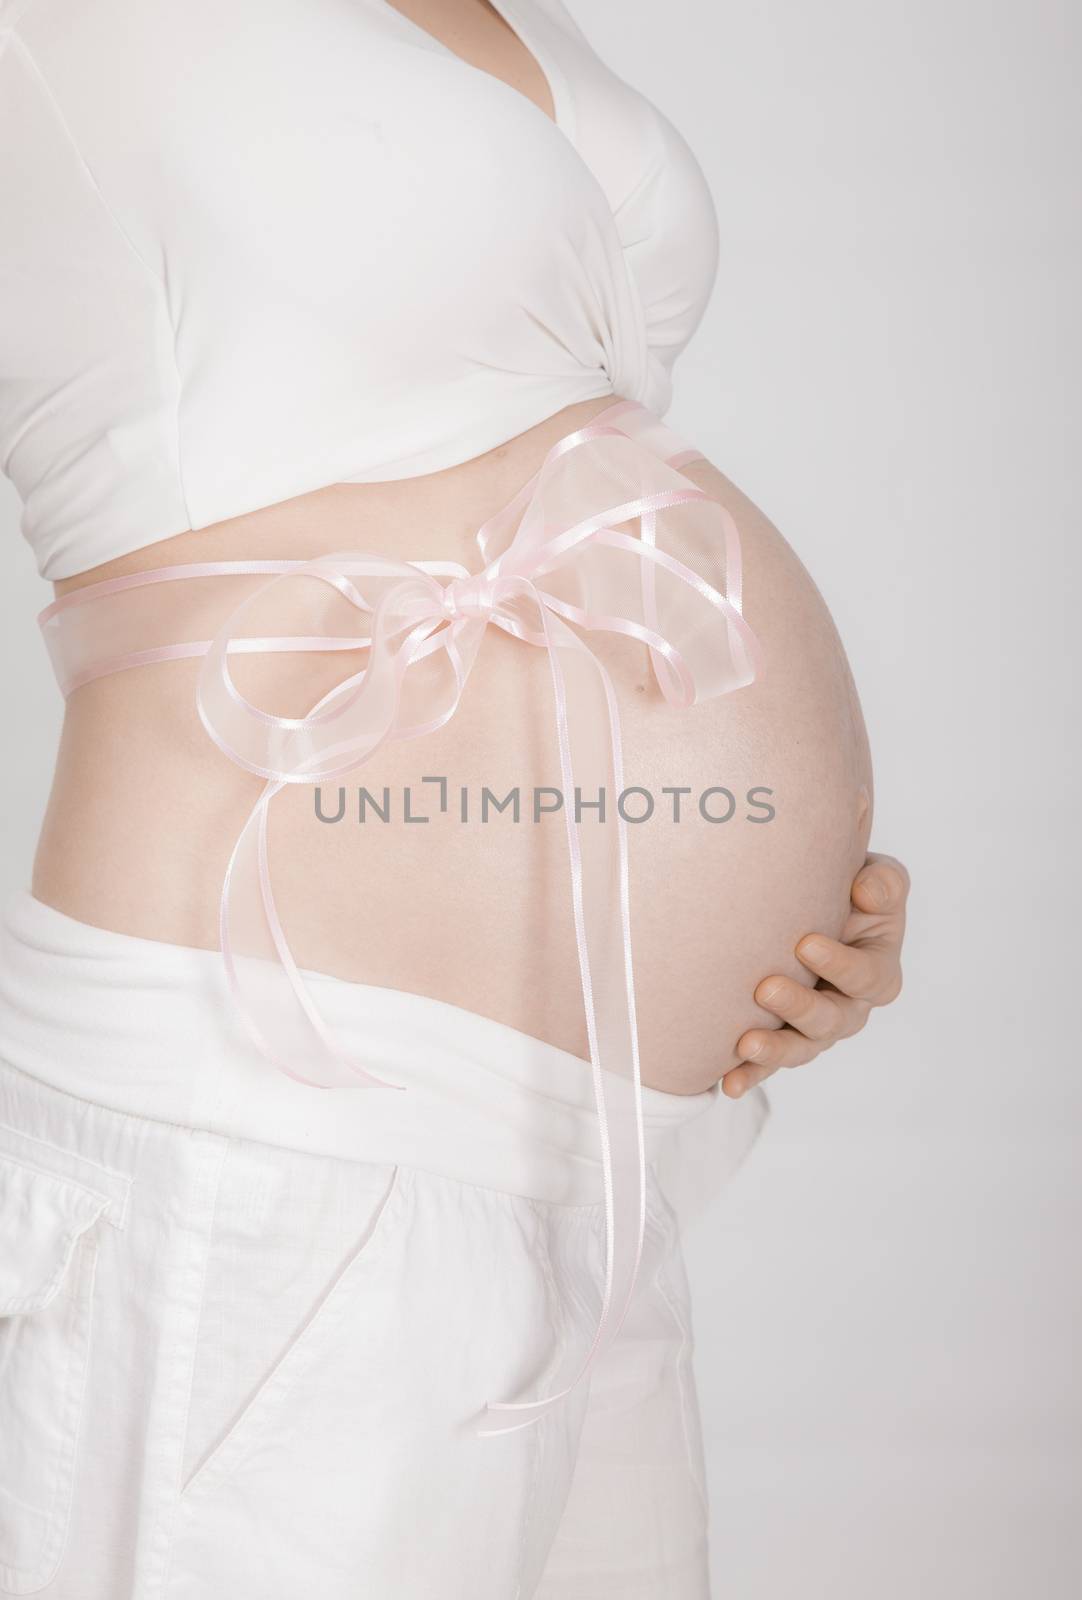 A close-up of a pregnant woman s abdomen, pink ribbon around it, white clothing, high key.